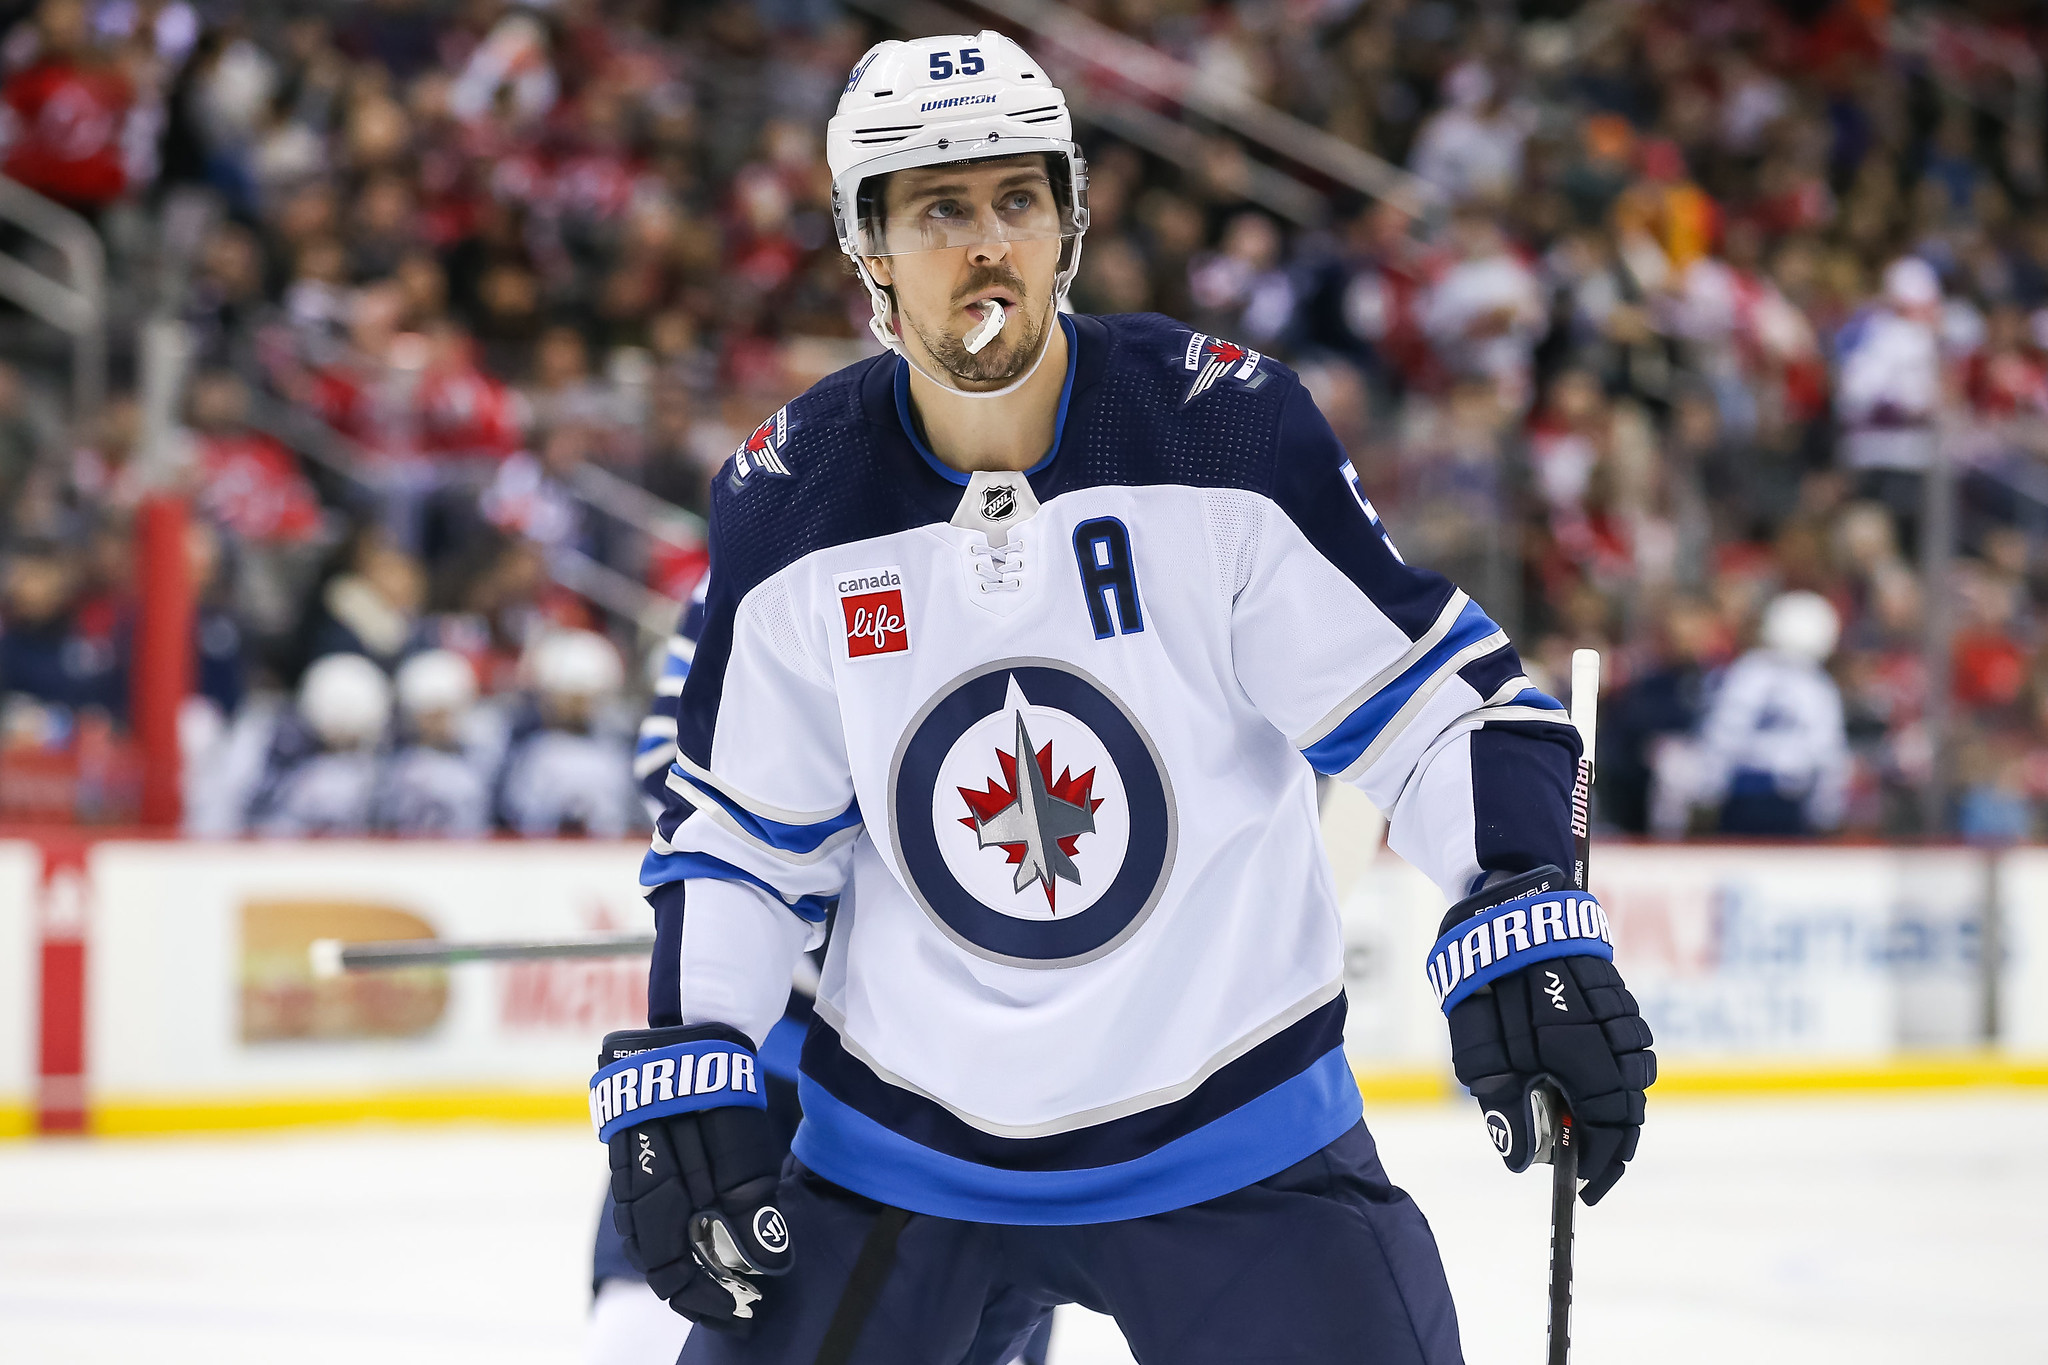 Jets’ Scheifele Situation Could Play Out Many Ways